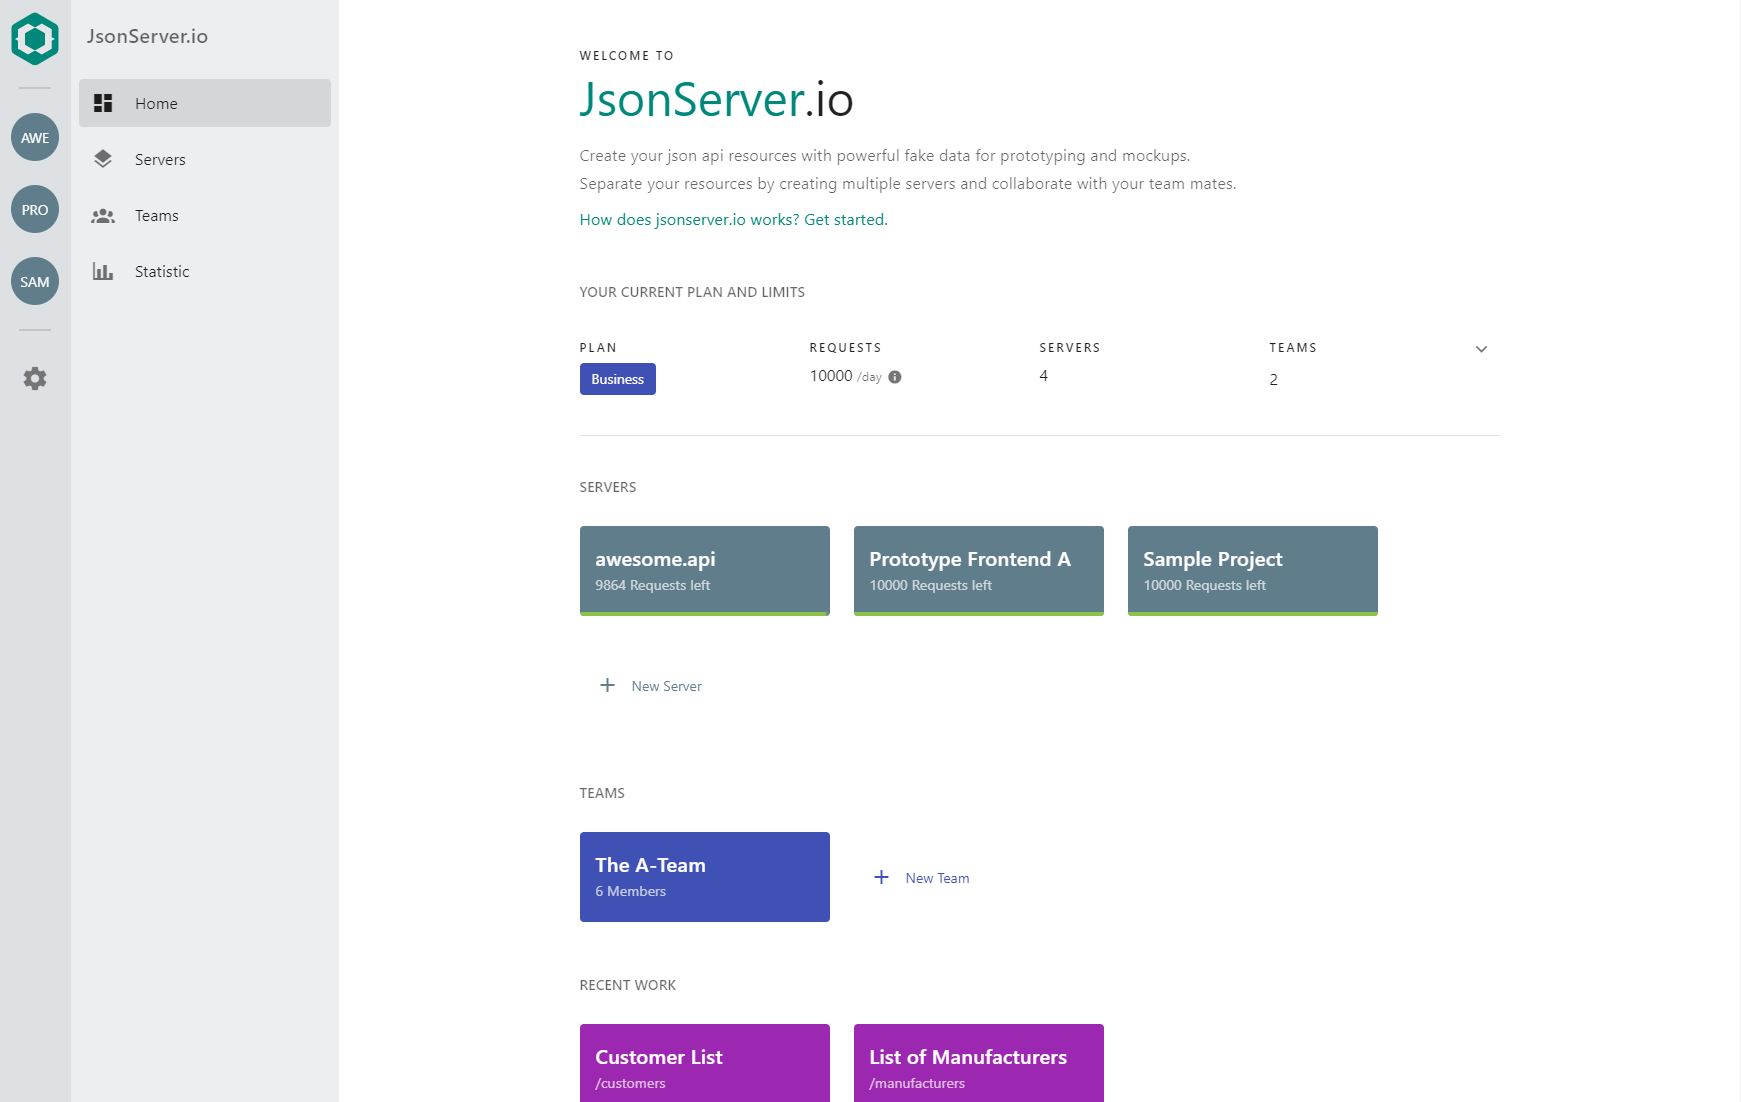 Download JsonServer.io: A fake json server API Service for prototyping and testing.